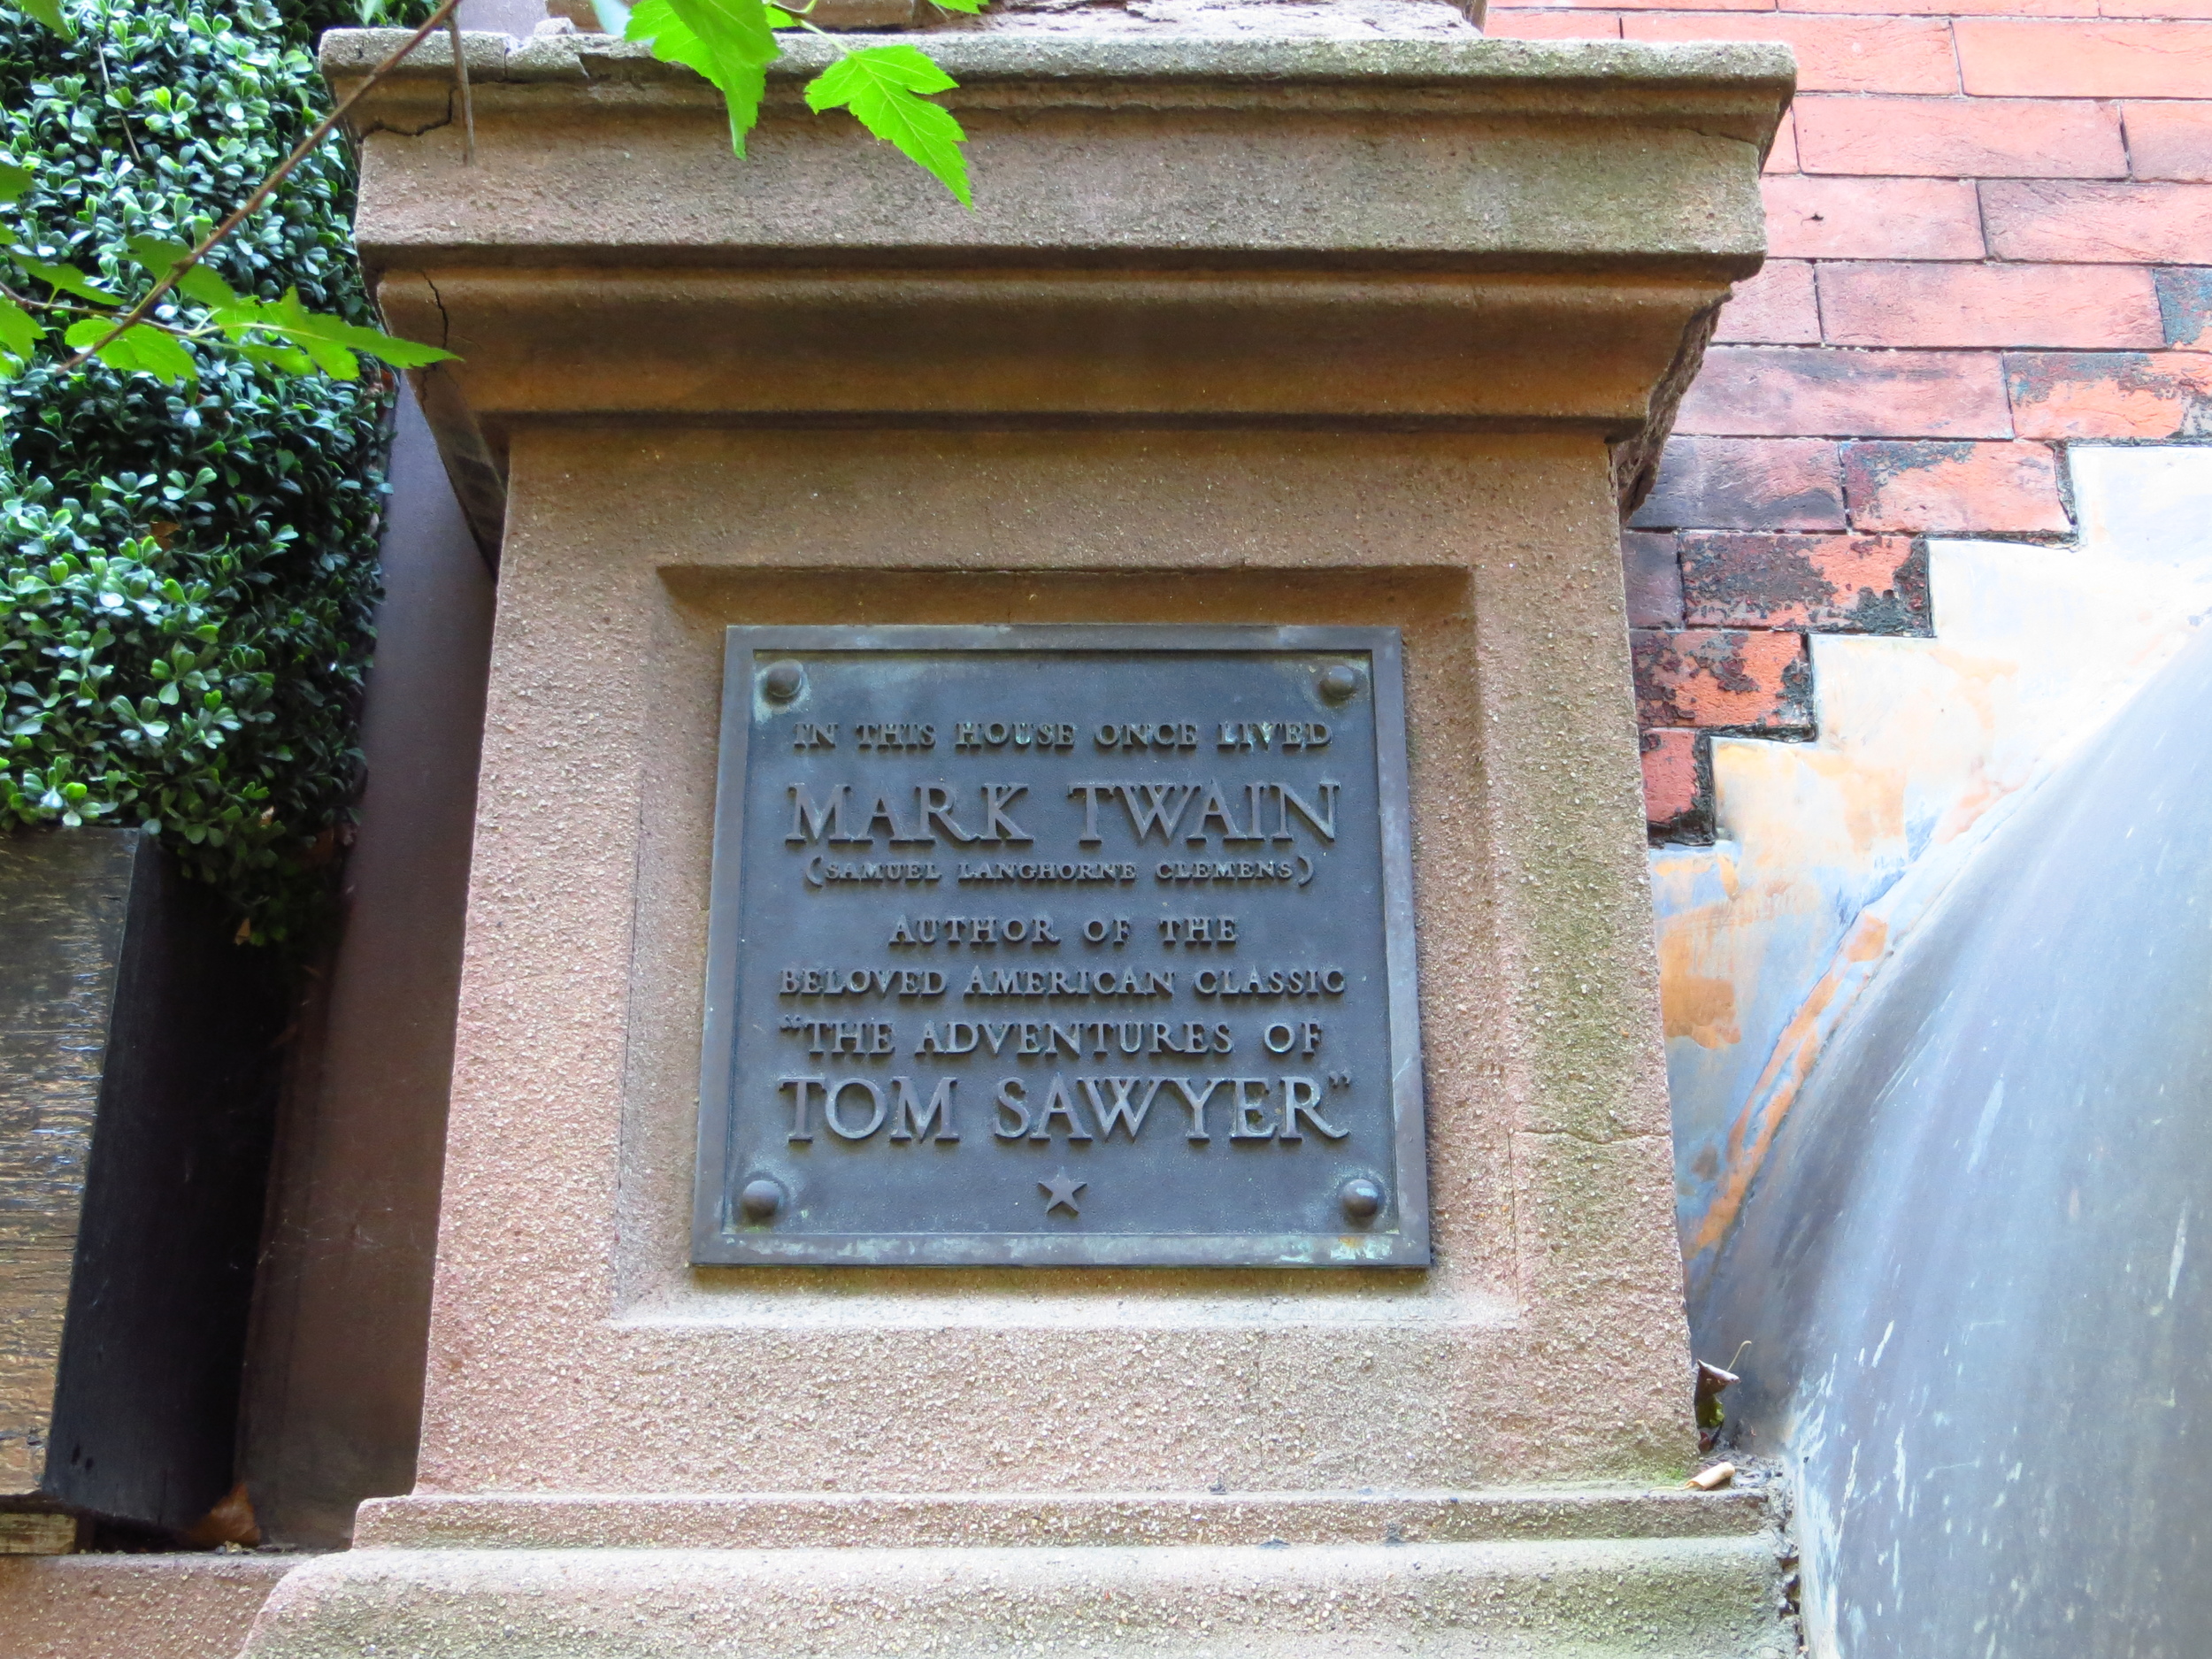 ...also Mark Twain lived there